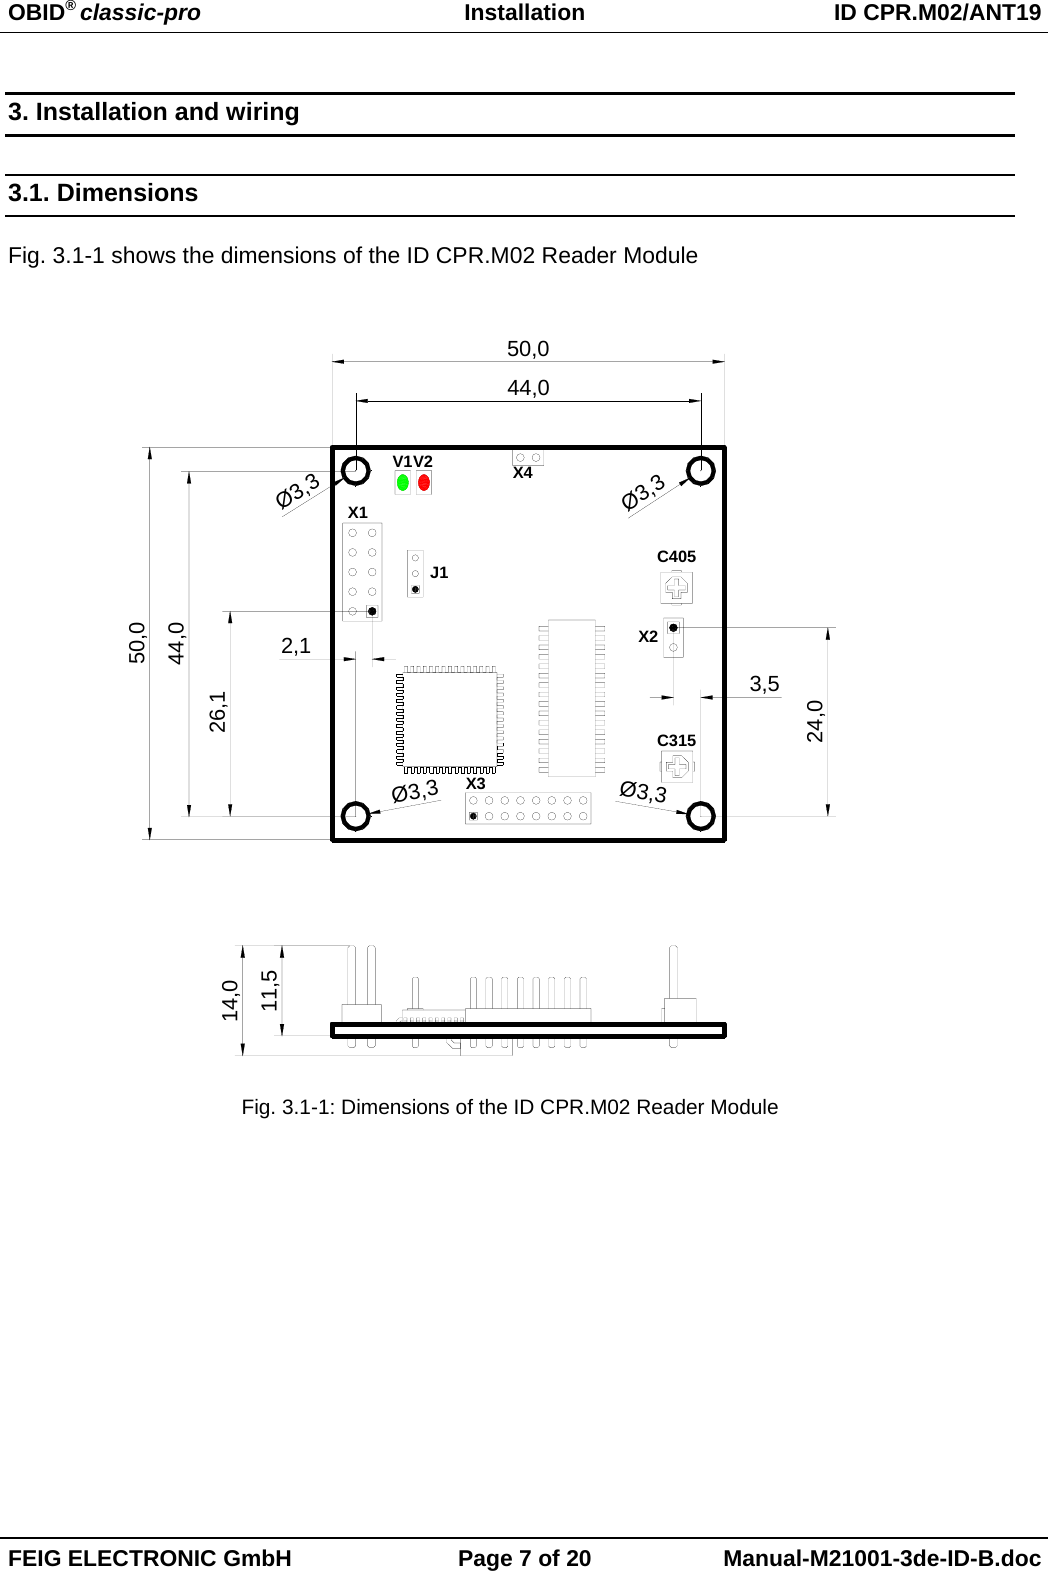 OBID® classic-pro Installation ID CPR.M02/ANT19FEIG ELECTRONIC GmbH Page 7 of 20 Manual-M21001-3de-ID-B.doc3. Installation and wiring3.1. DimensionsFig. 3.1-1 shows the dimensions of the ID CPR.M02 Reader ModuleFig. 3.1-1: Dimensions of the ID CPR.M02 Reader ModuleX1J1V2V1C31544,050,026,12,1Ø3,3Ø3,3Ø3,3Ø3,314,011,5X3X444,050,0C405X224,03,5